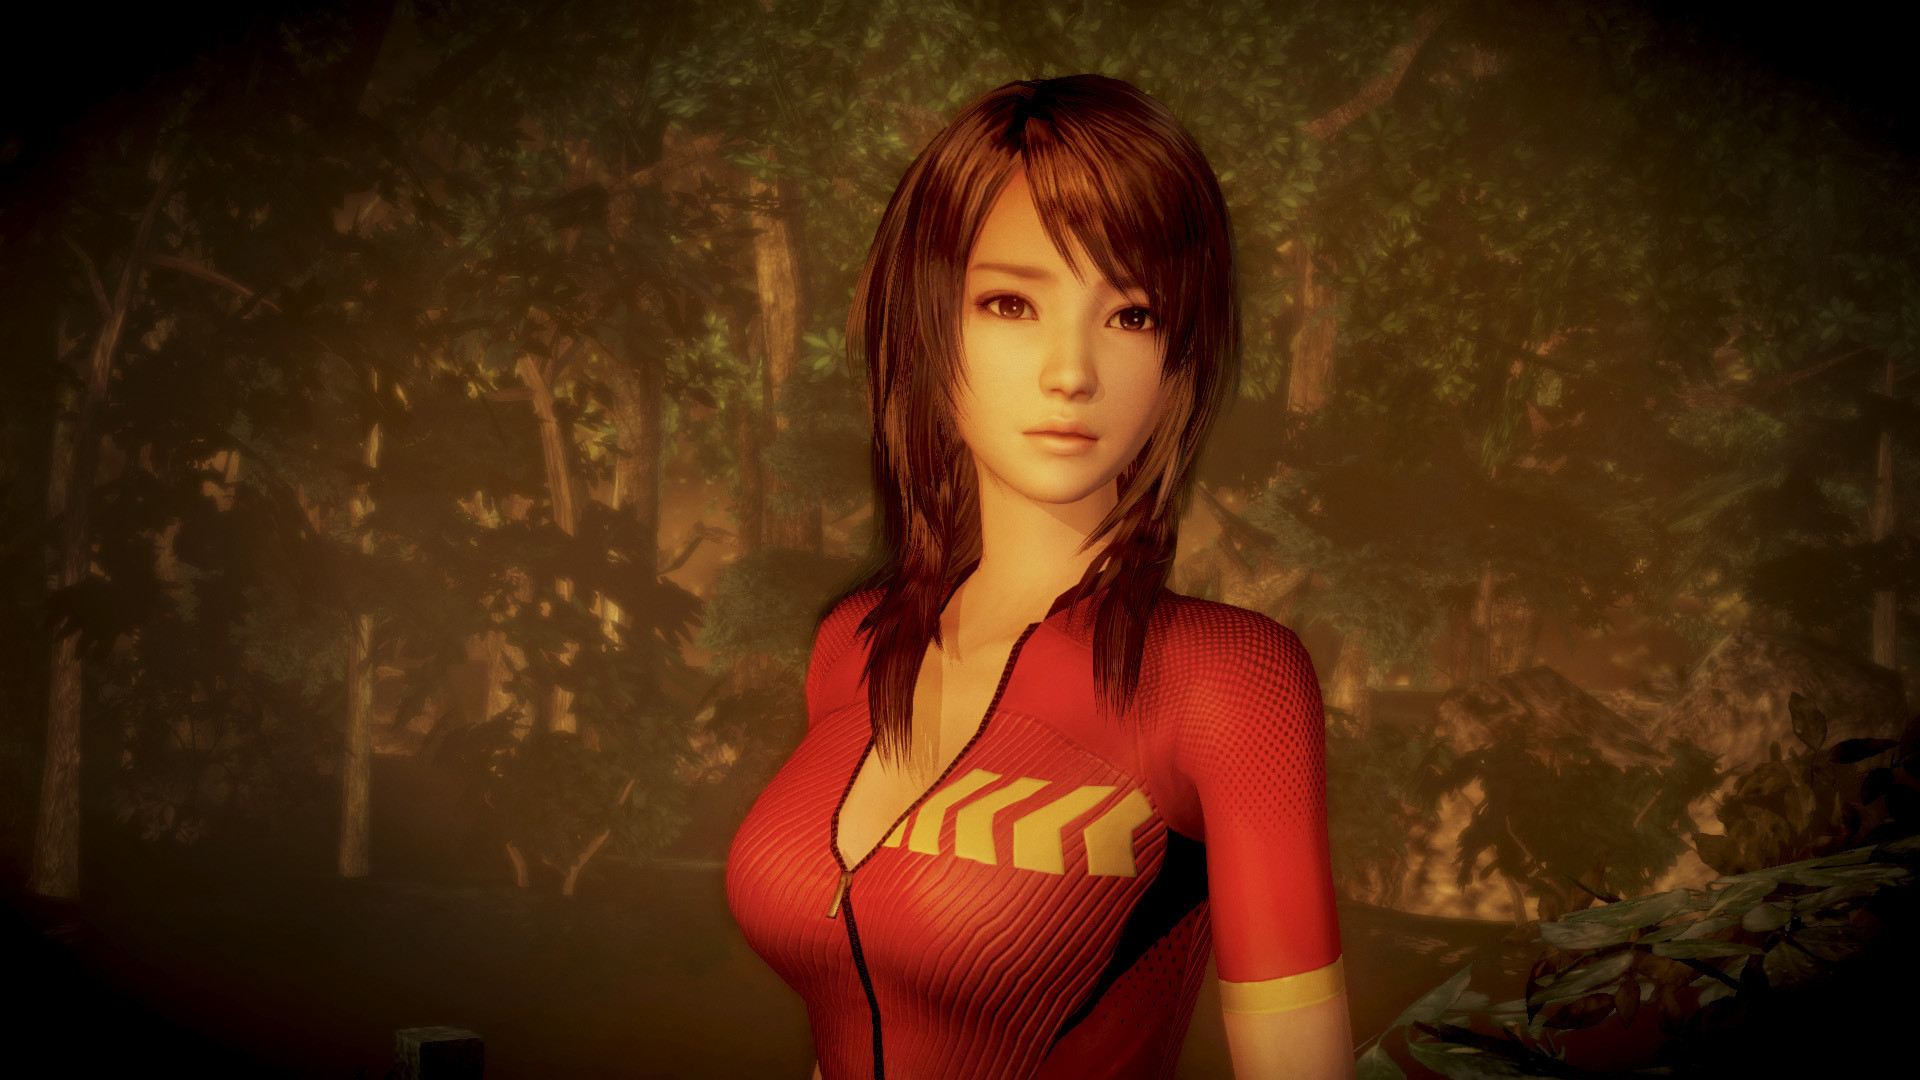 FATAL FRAME / PROJECT ZERO: Maiden of Black Water Free Download for PC